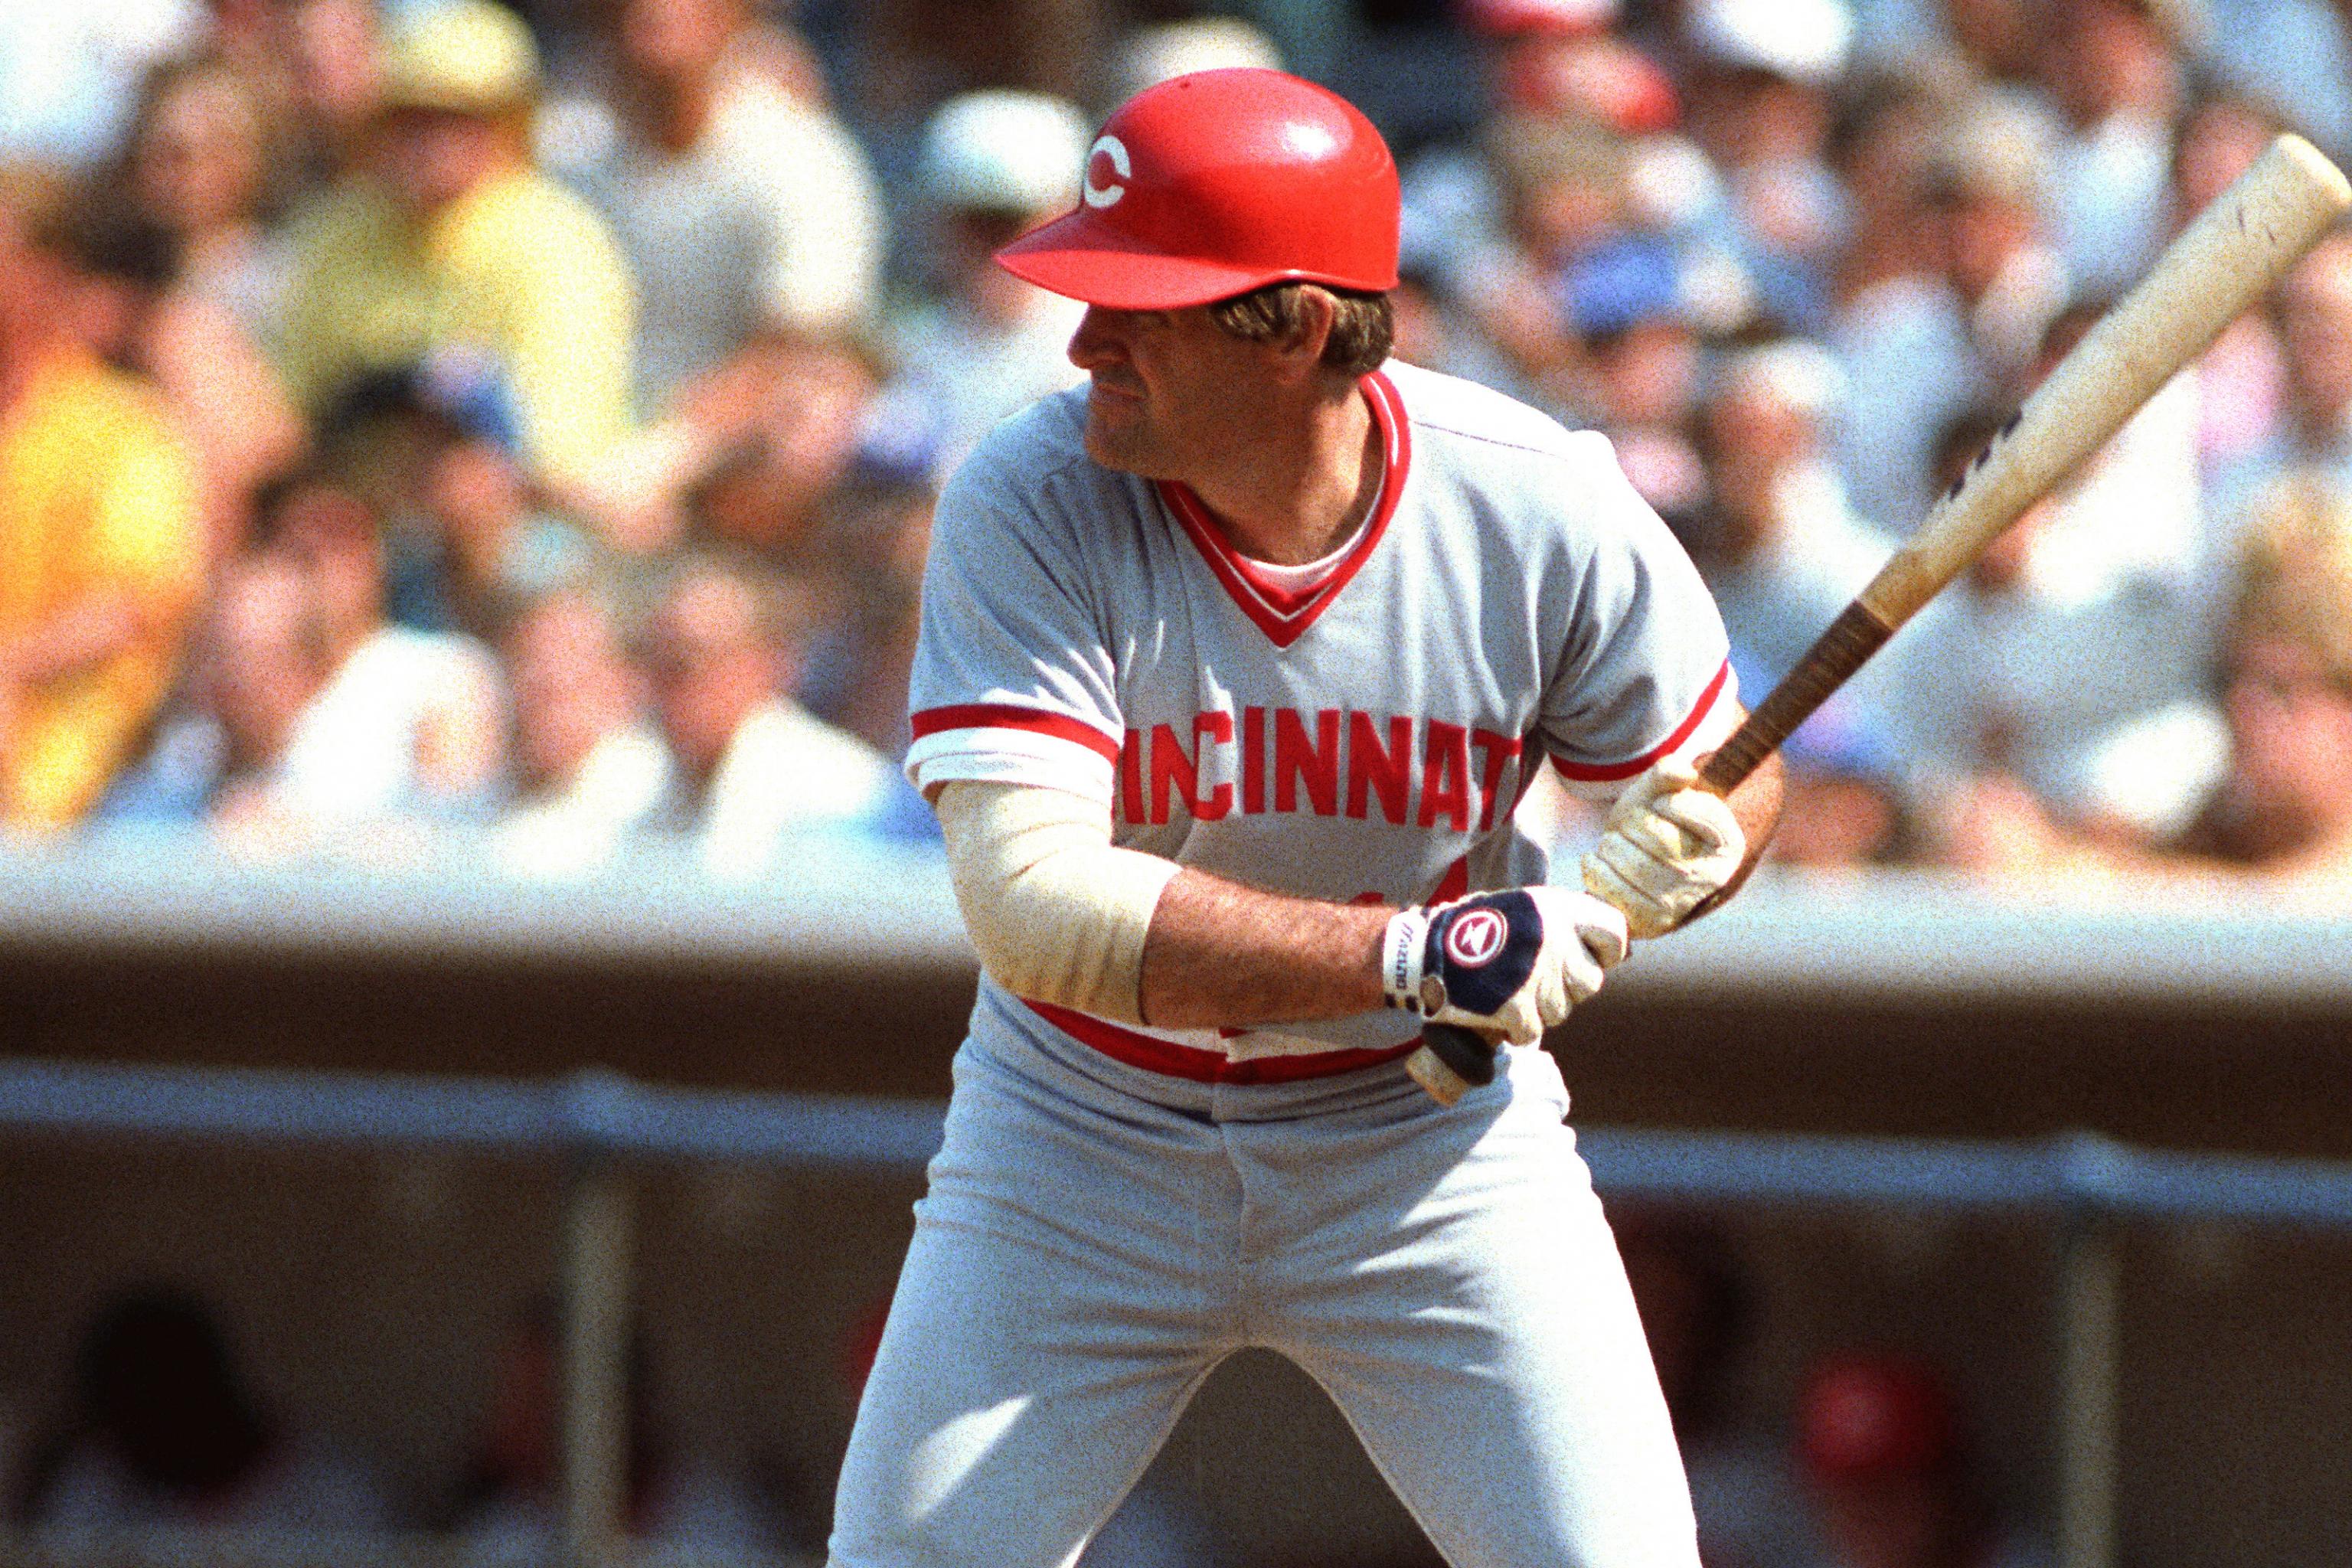 Pete Rose reportedly bet on games as a player with Cincinnati Reds